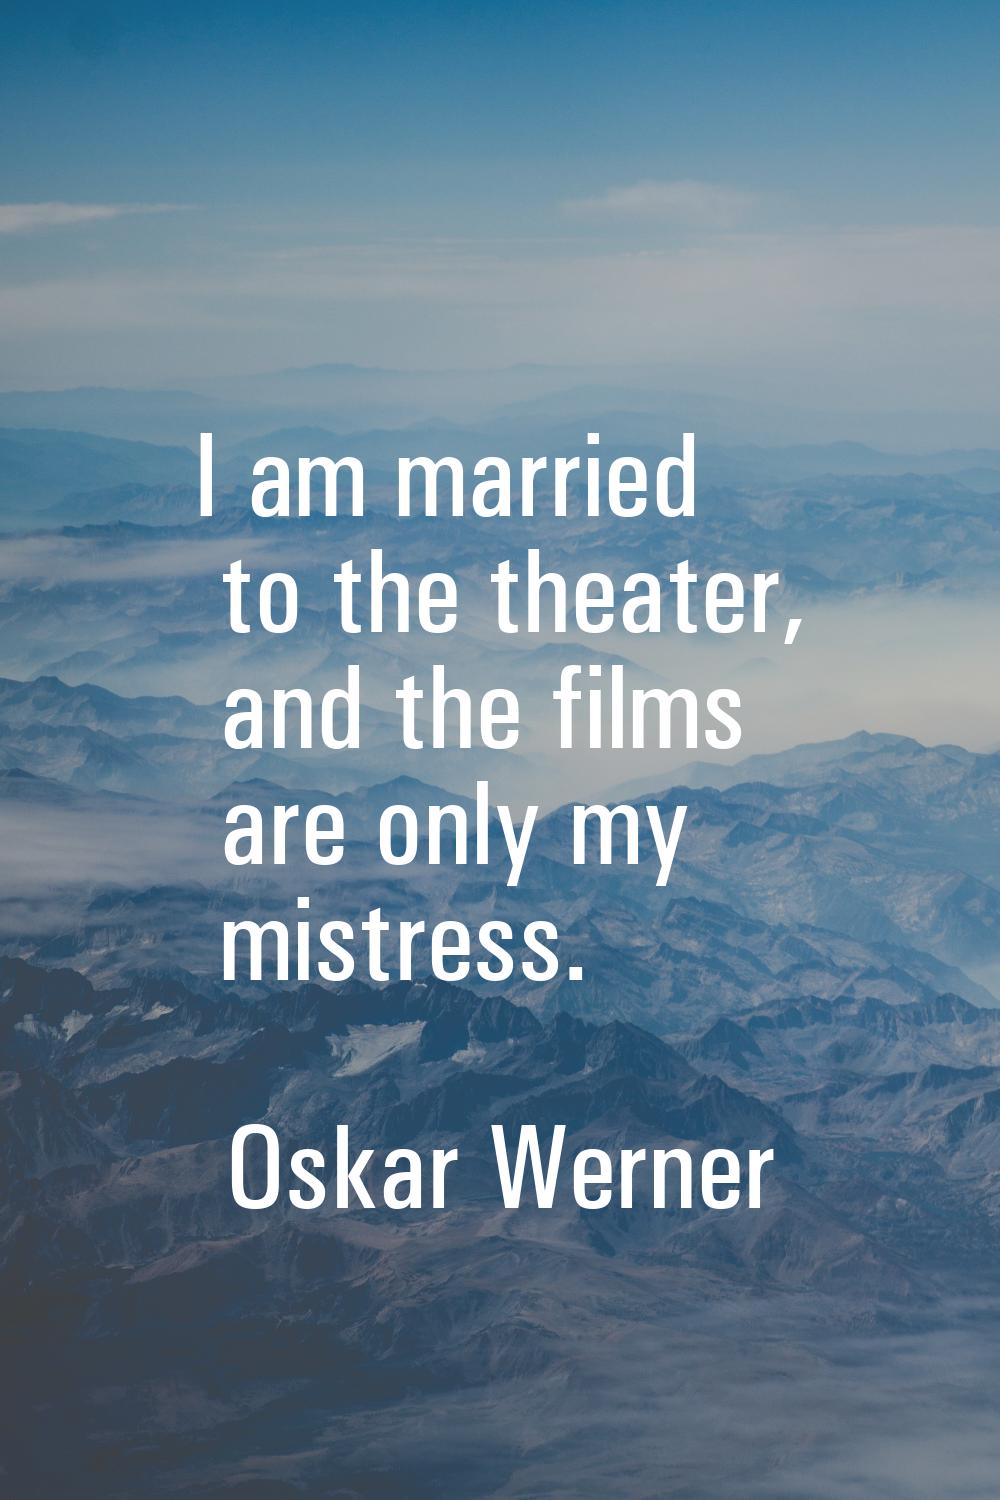 I am married to the theater, and the films are only my mistress.